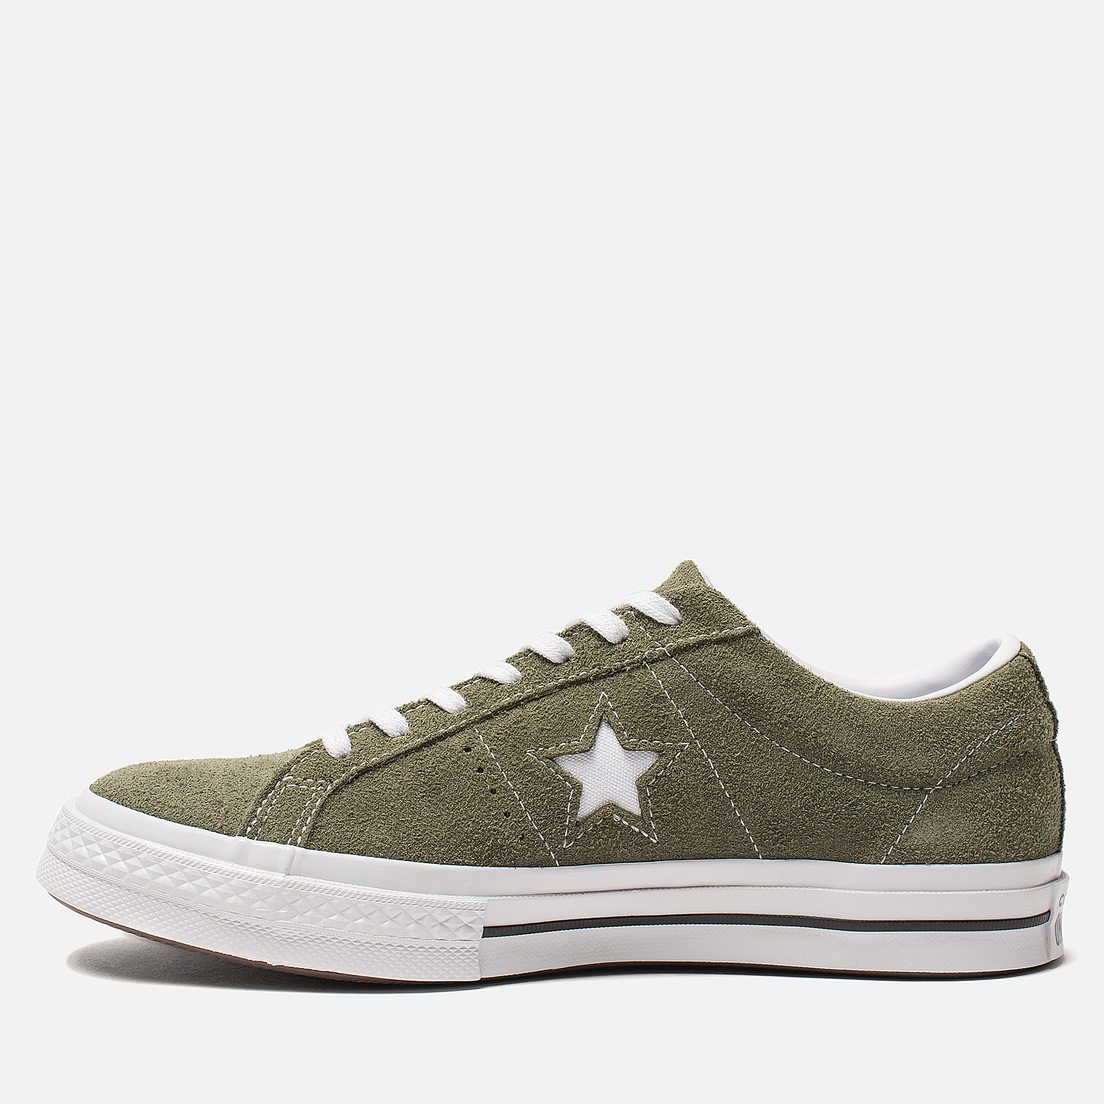 converse one star og suede